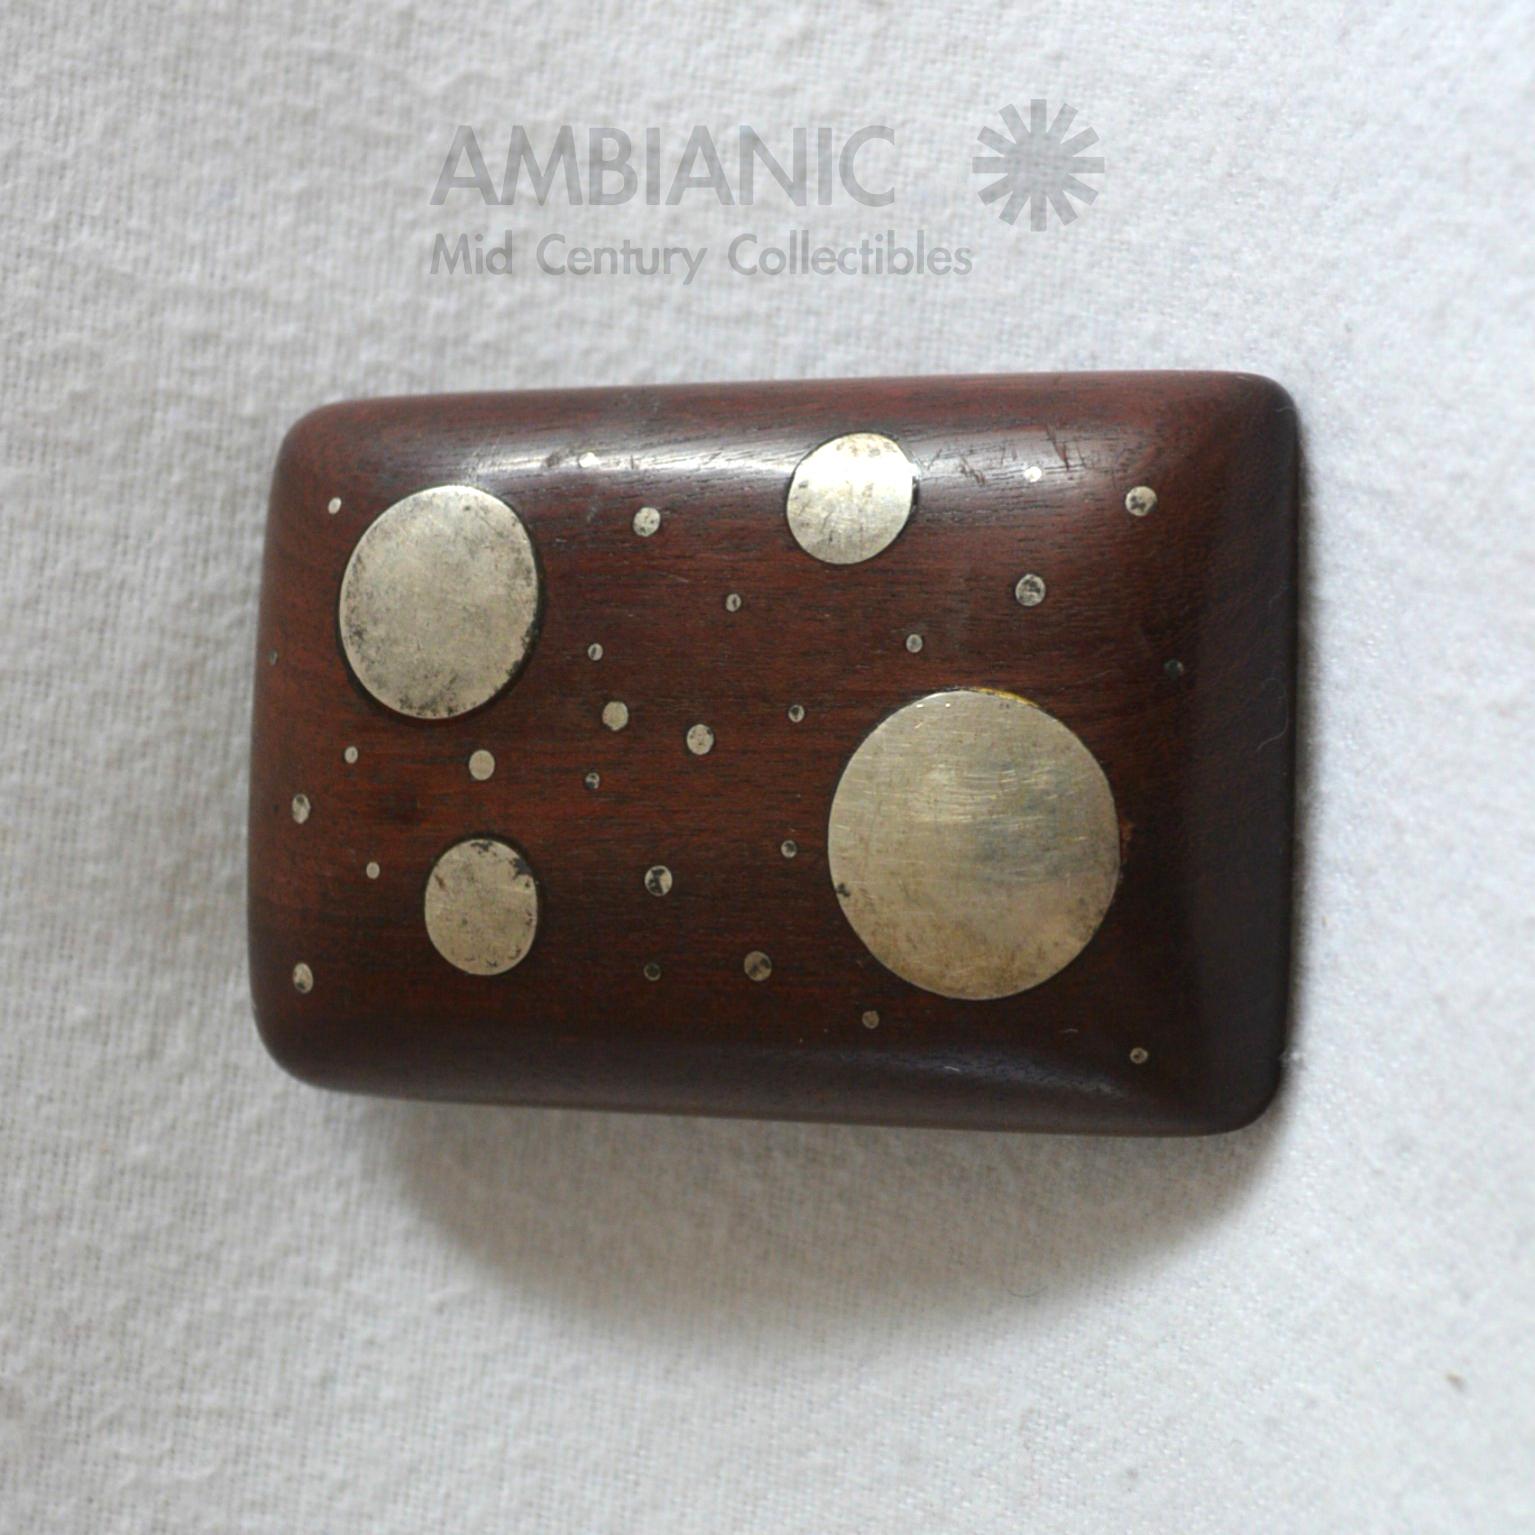 Mexican modernist belt buckle sterling silver circles encrusted in solid mahogany wood.
Mexico, circa 1960s. Attributed to William Spratling. No label.
Dimensions: 2 3/4